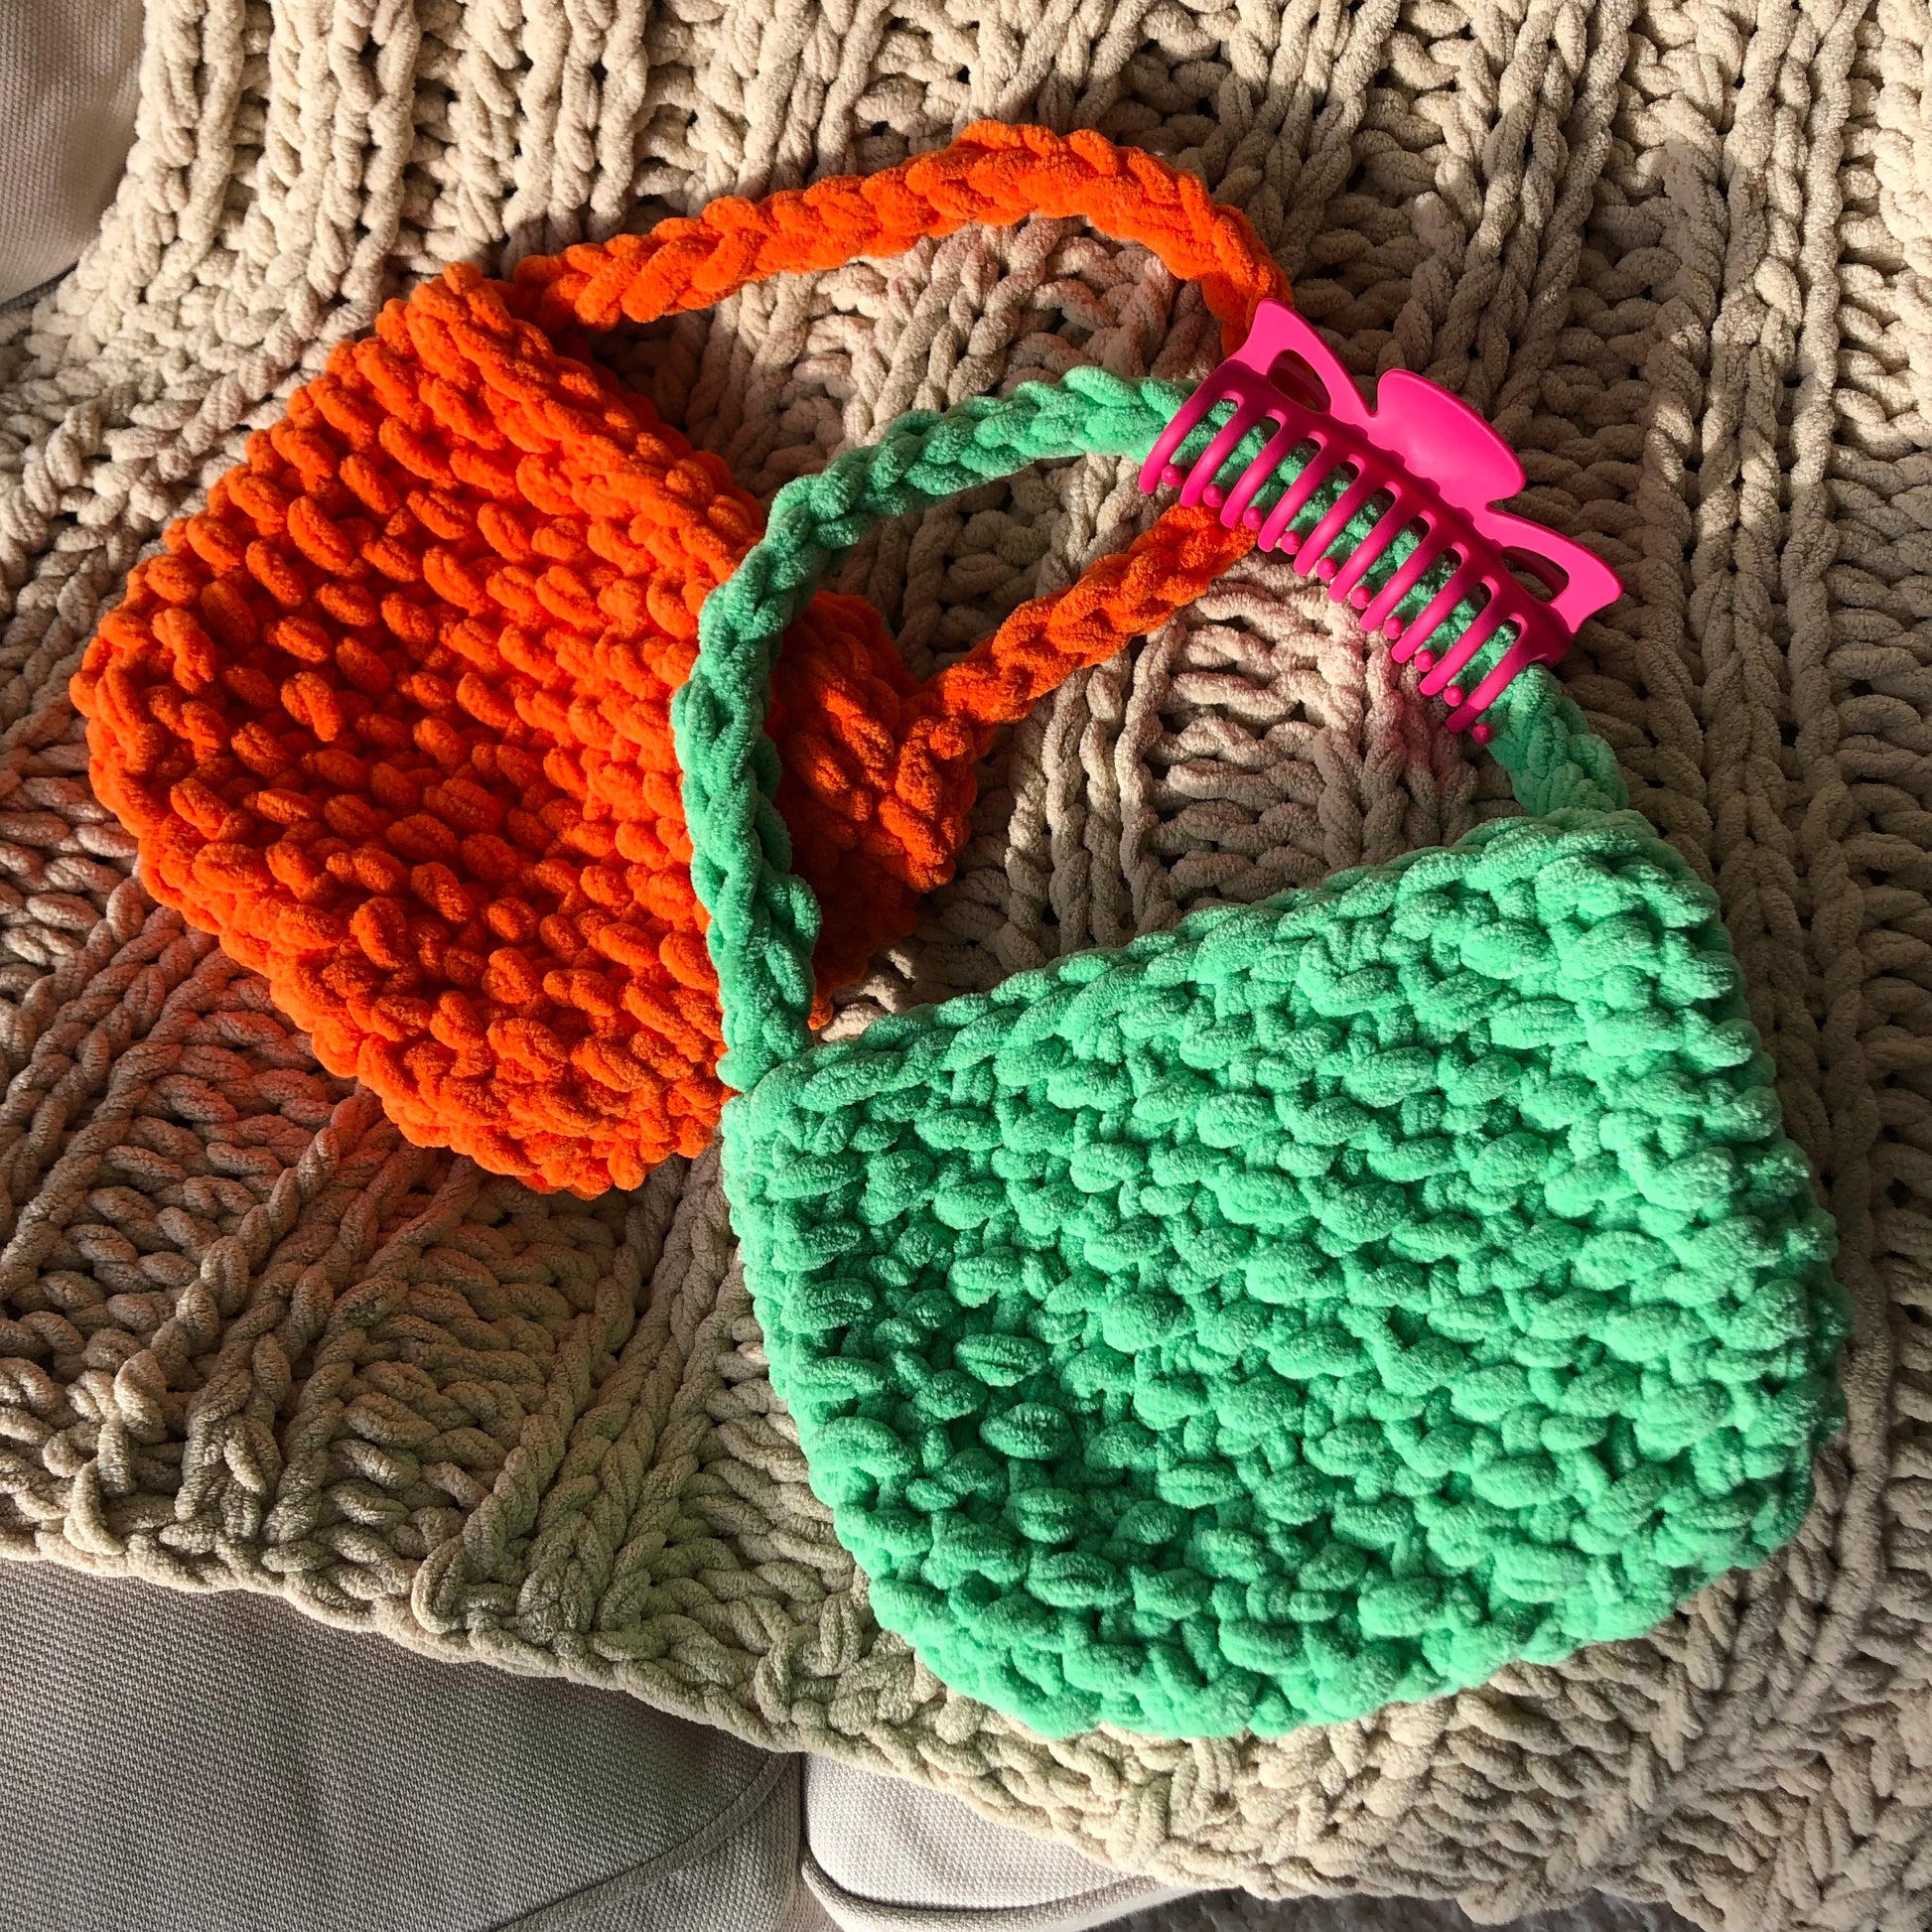 Bubble bag beginner knitting kit made from squishy chenille yarn